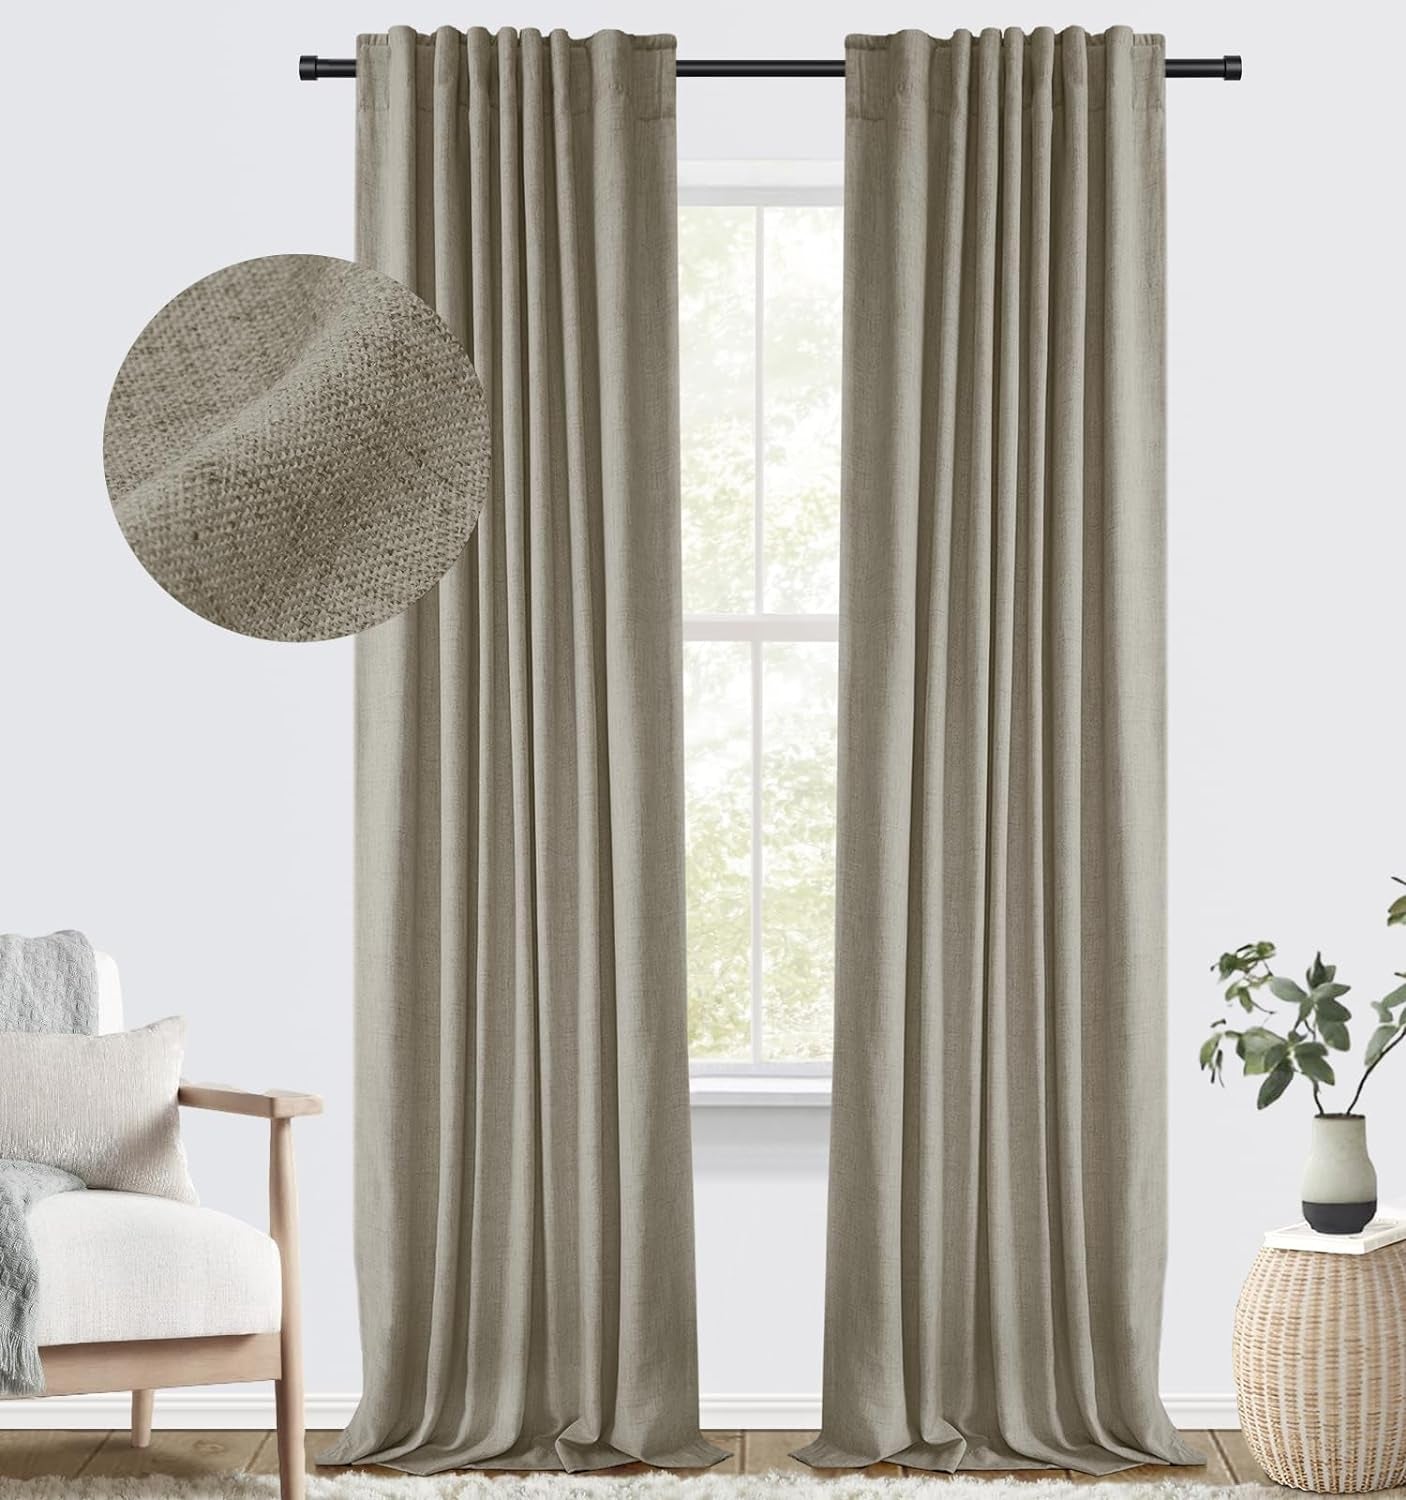 100% Blackout Shield Blackout Curtains for Bedroom Faux Linen Black Out Curtains 84 Inch Length 2 Panels Set, Back Tab/Rod Pocket Thermal Insulated Curtains with Black Liner, 50W X 84L, Dark Grey  100% Blackout Shield Faux Linen 50''W X 102''L 